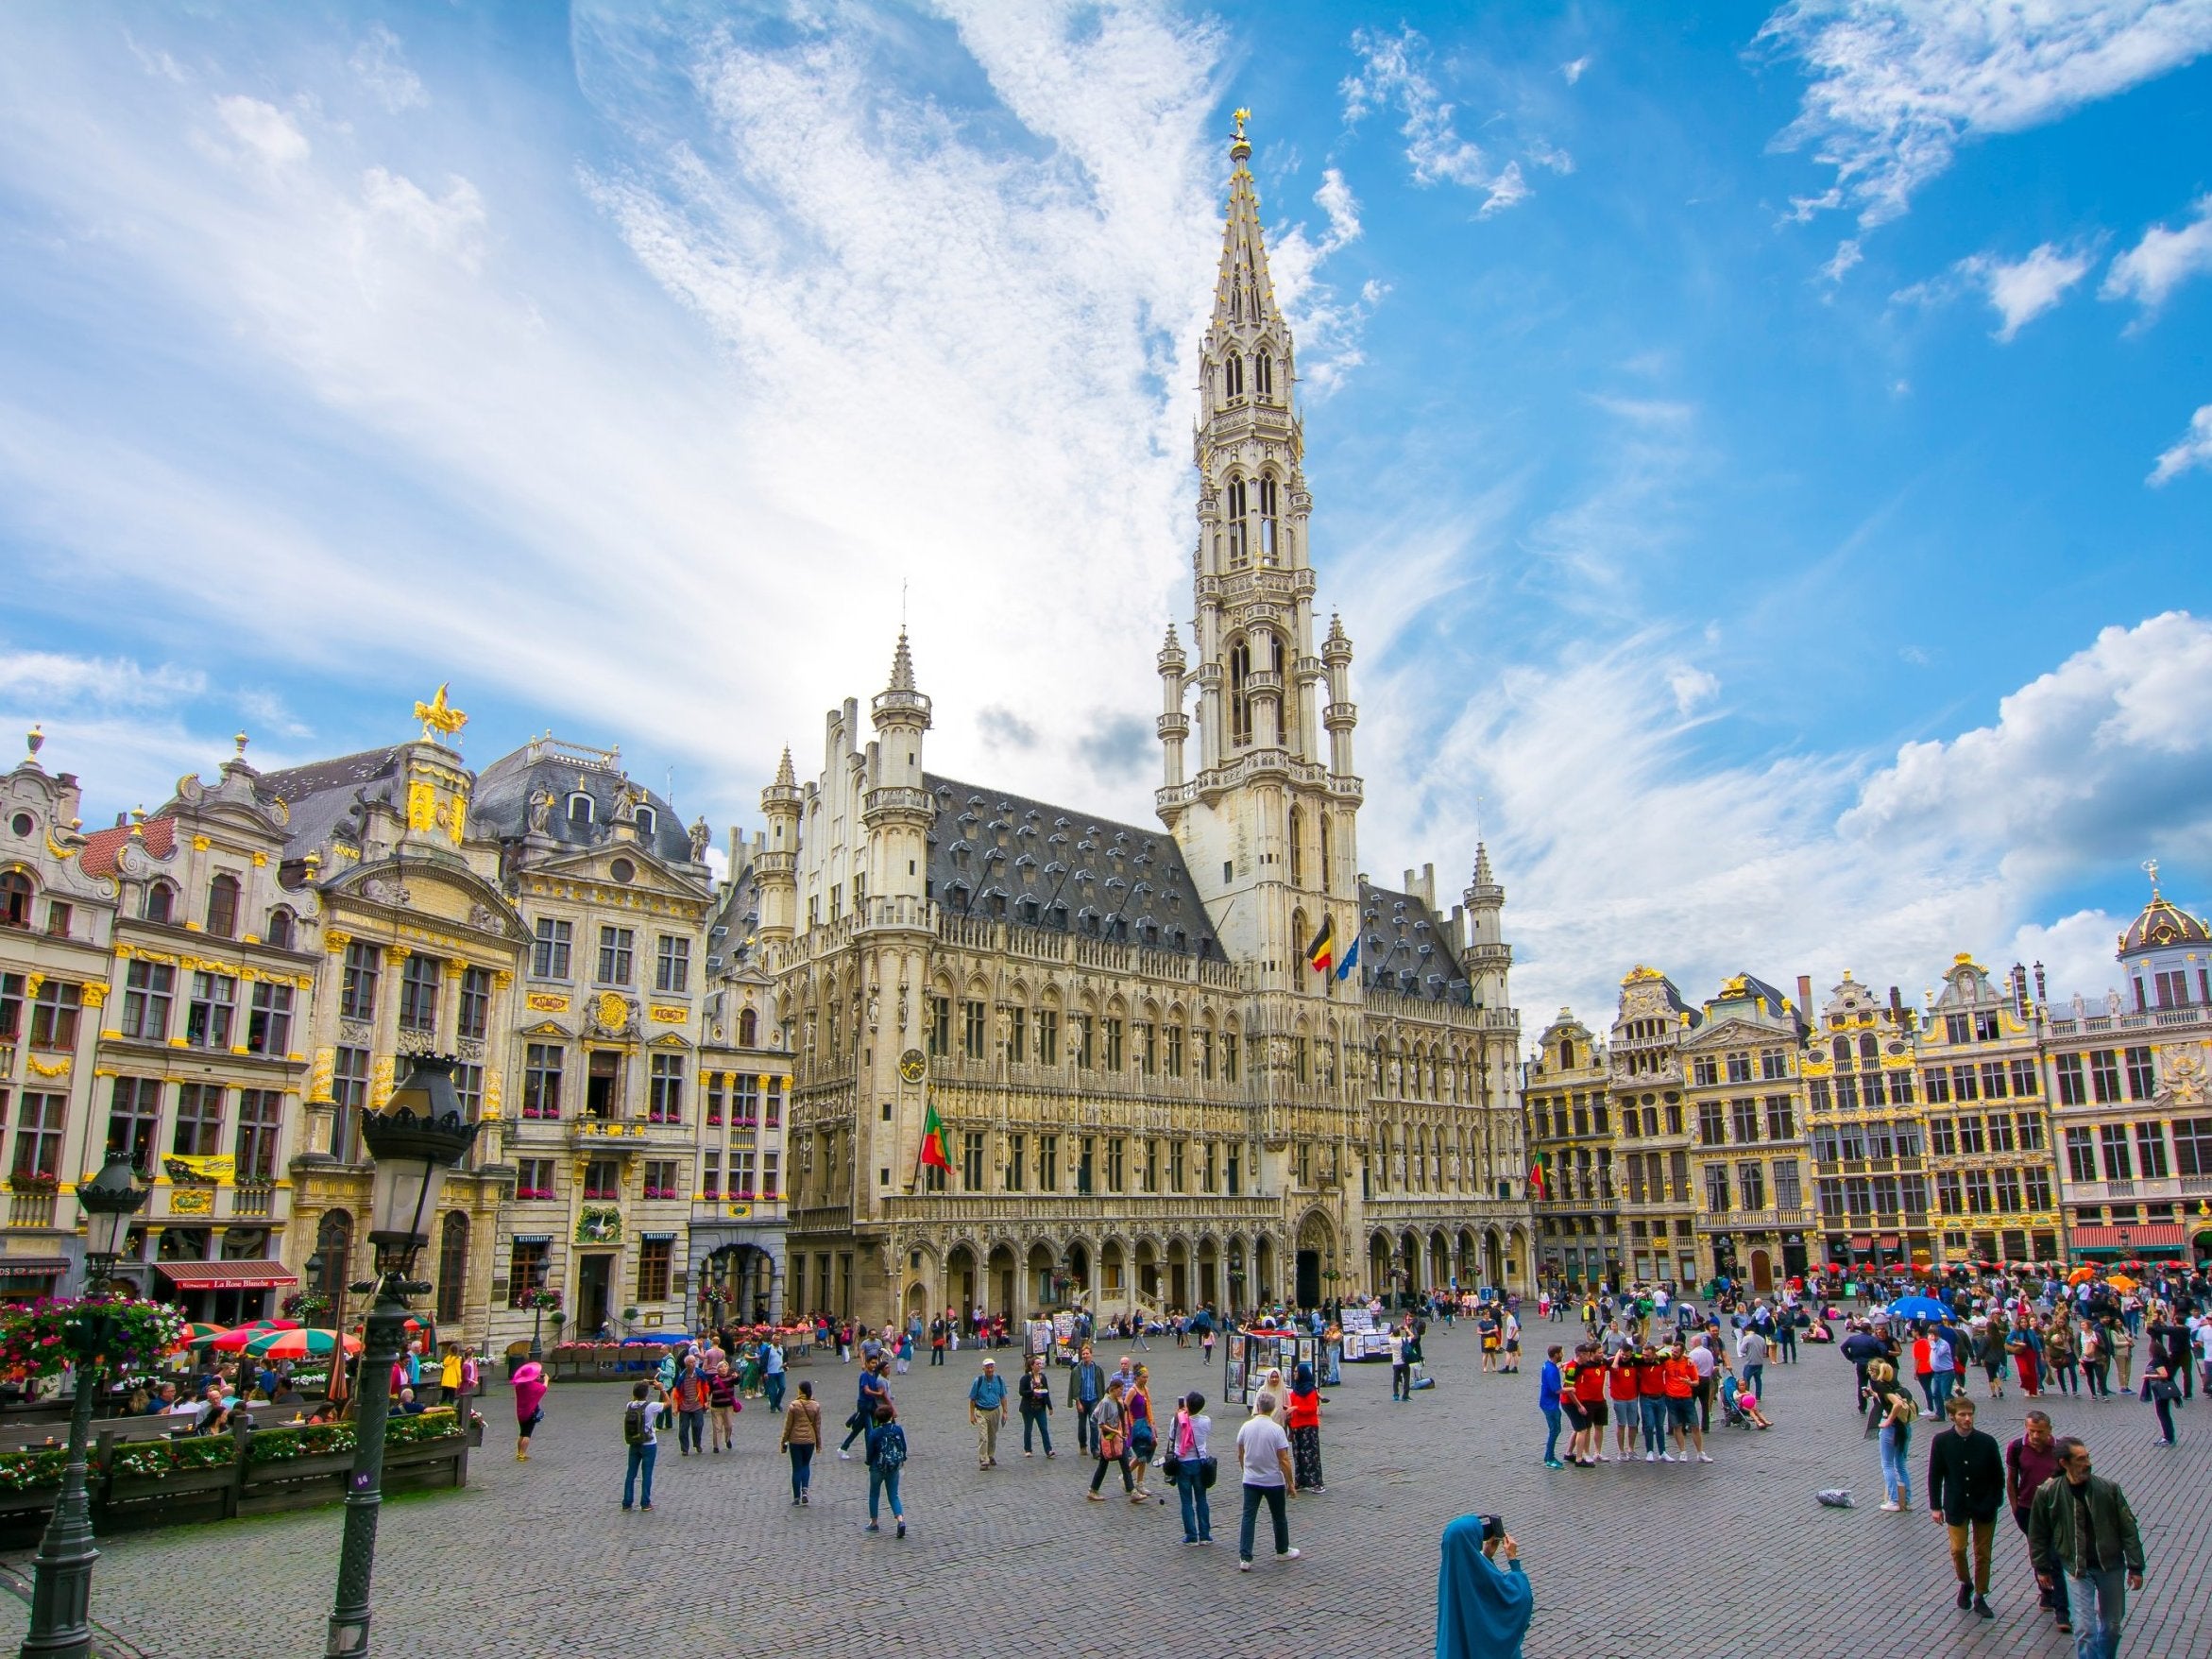 A flight to Brussels from London can be more expensive using vouchers